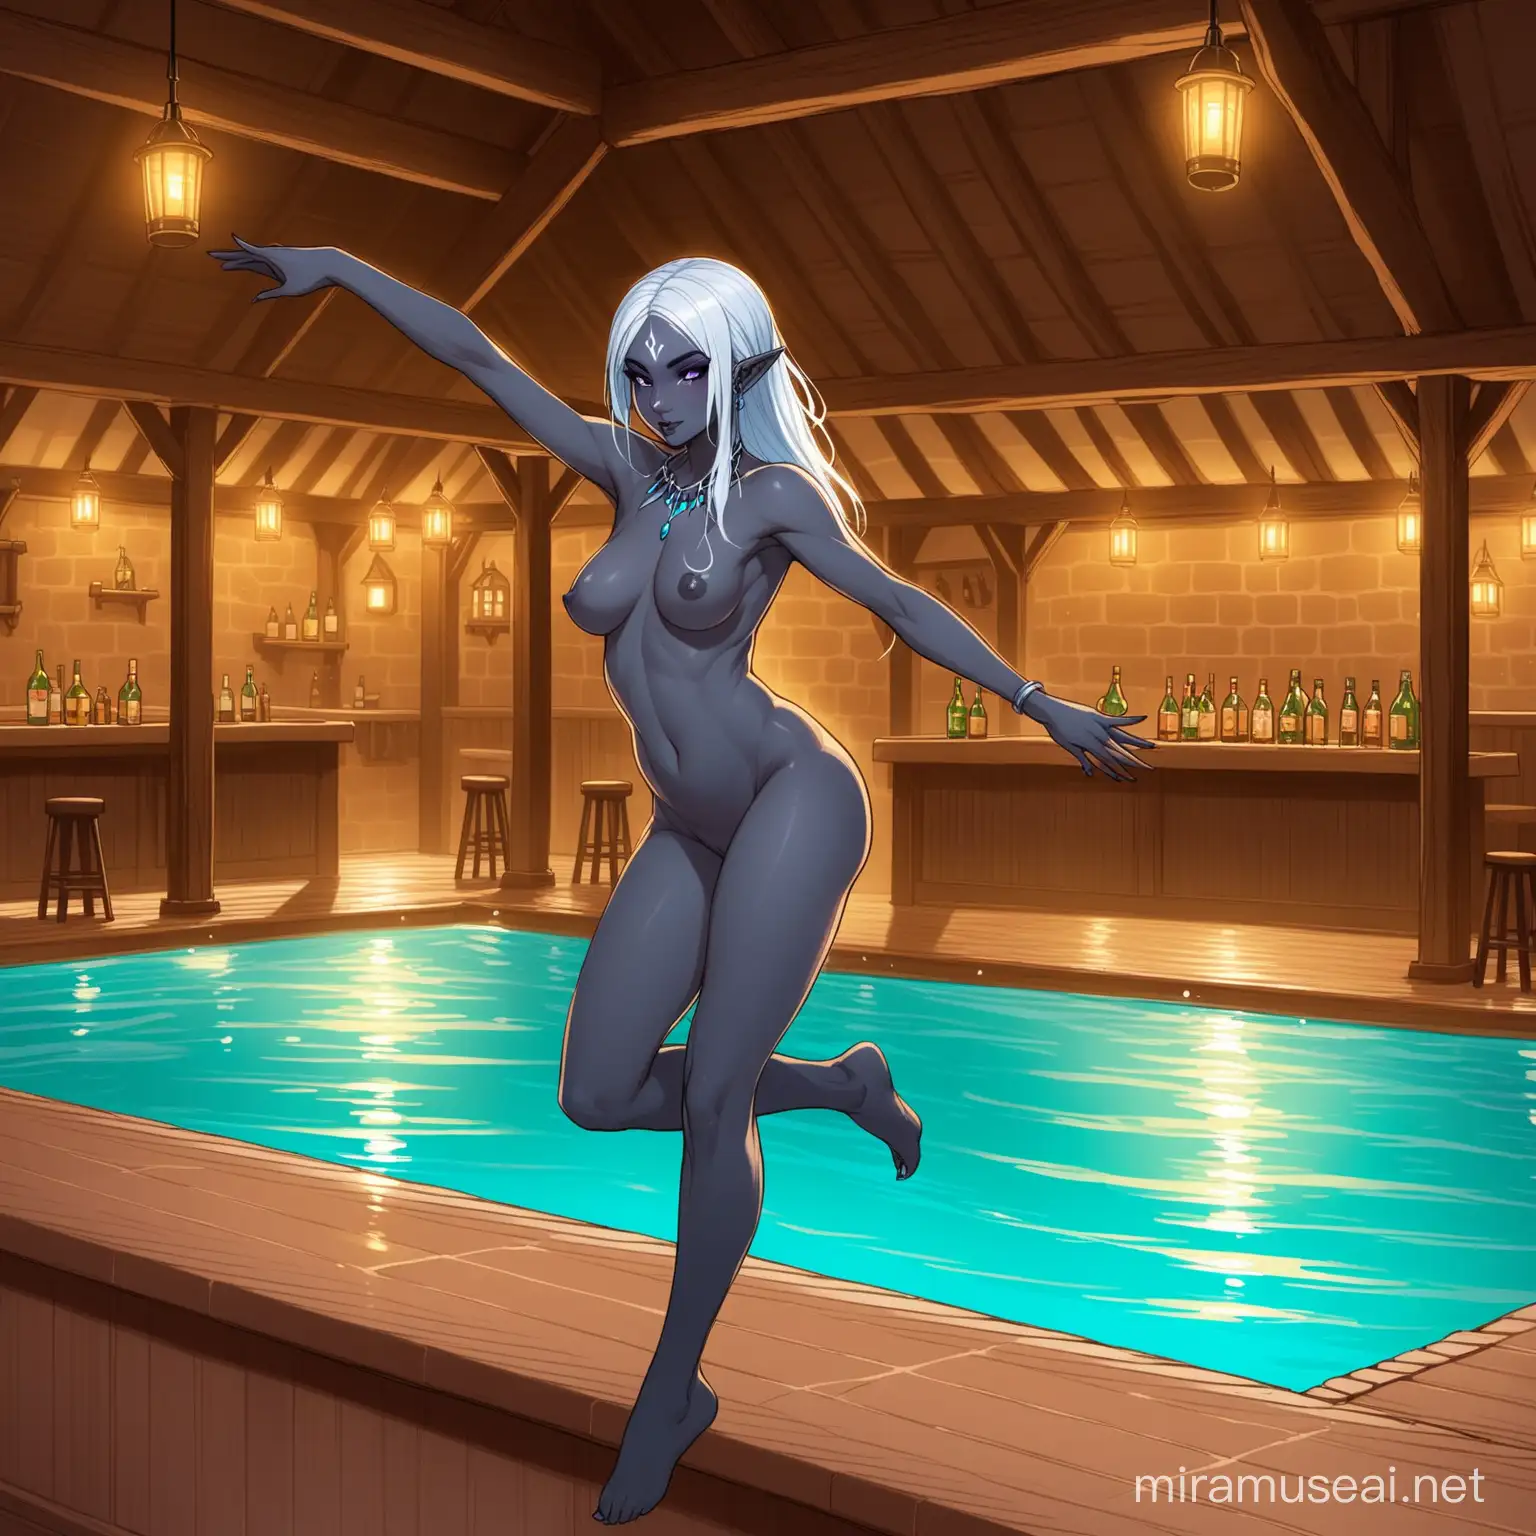 Drow Female Dancing by Spa Pool in Tavern Setting